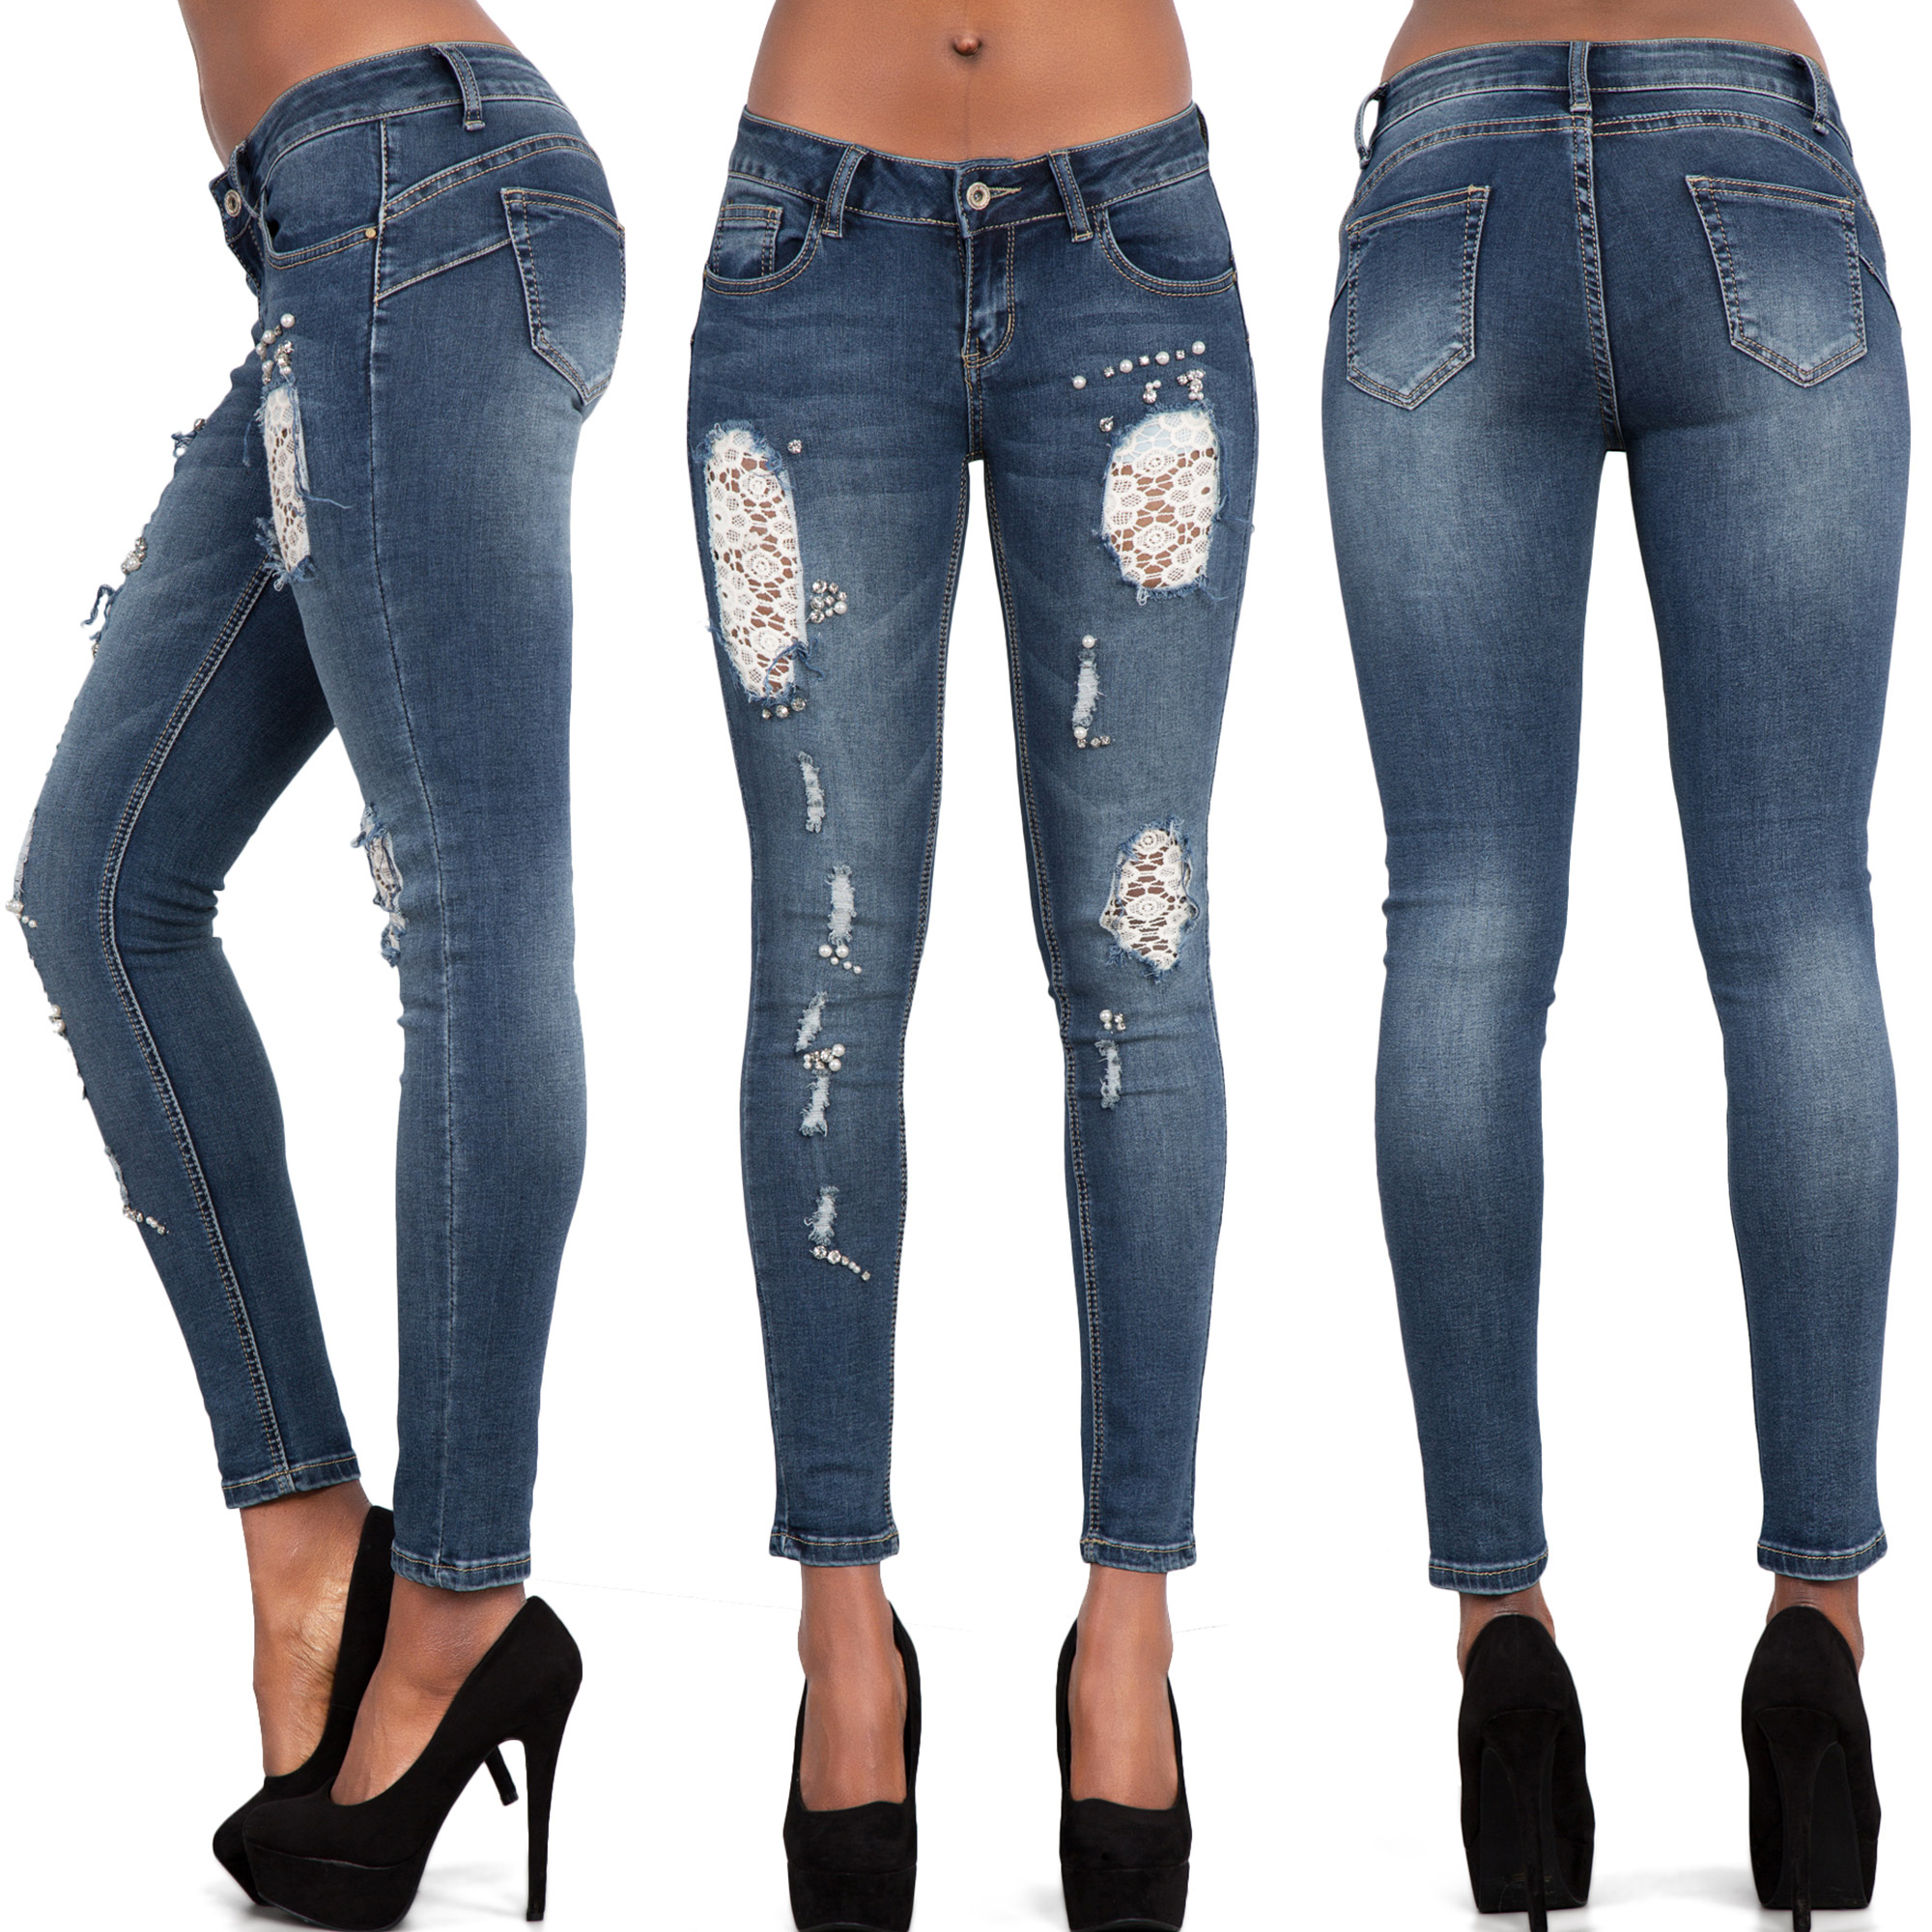 NEW WOMENS LADIES SKINNY FIT RIPPED JEANS FADED STRETCHY DENIM SIZE 6 ...